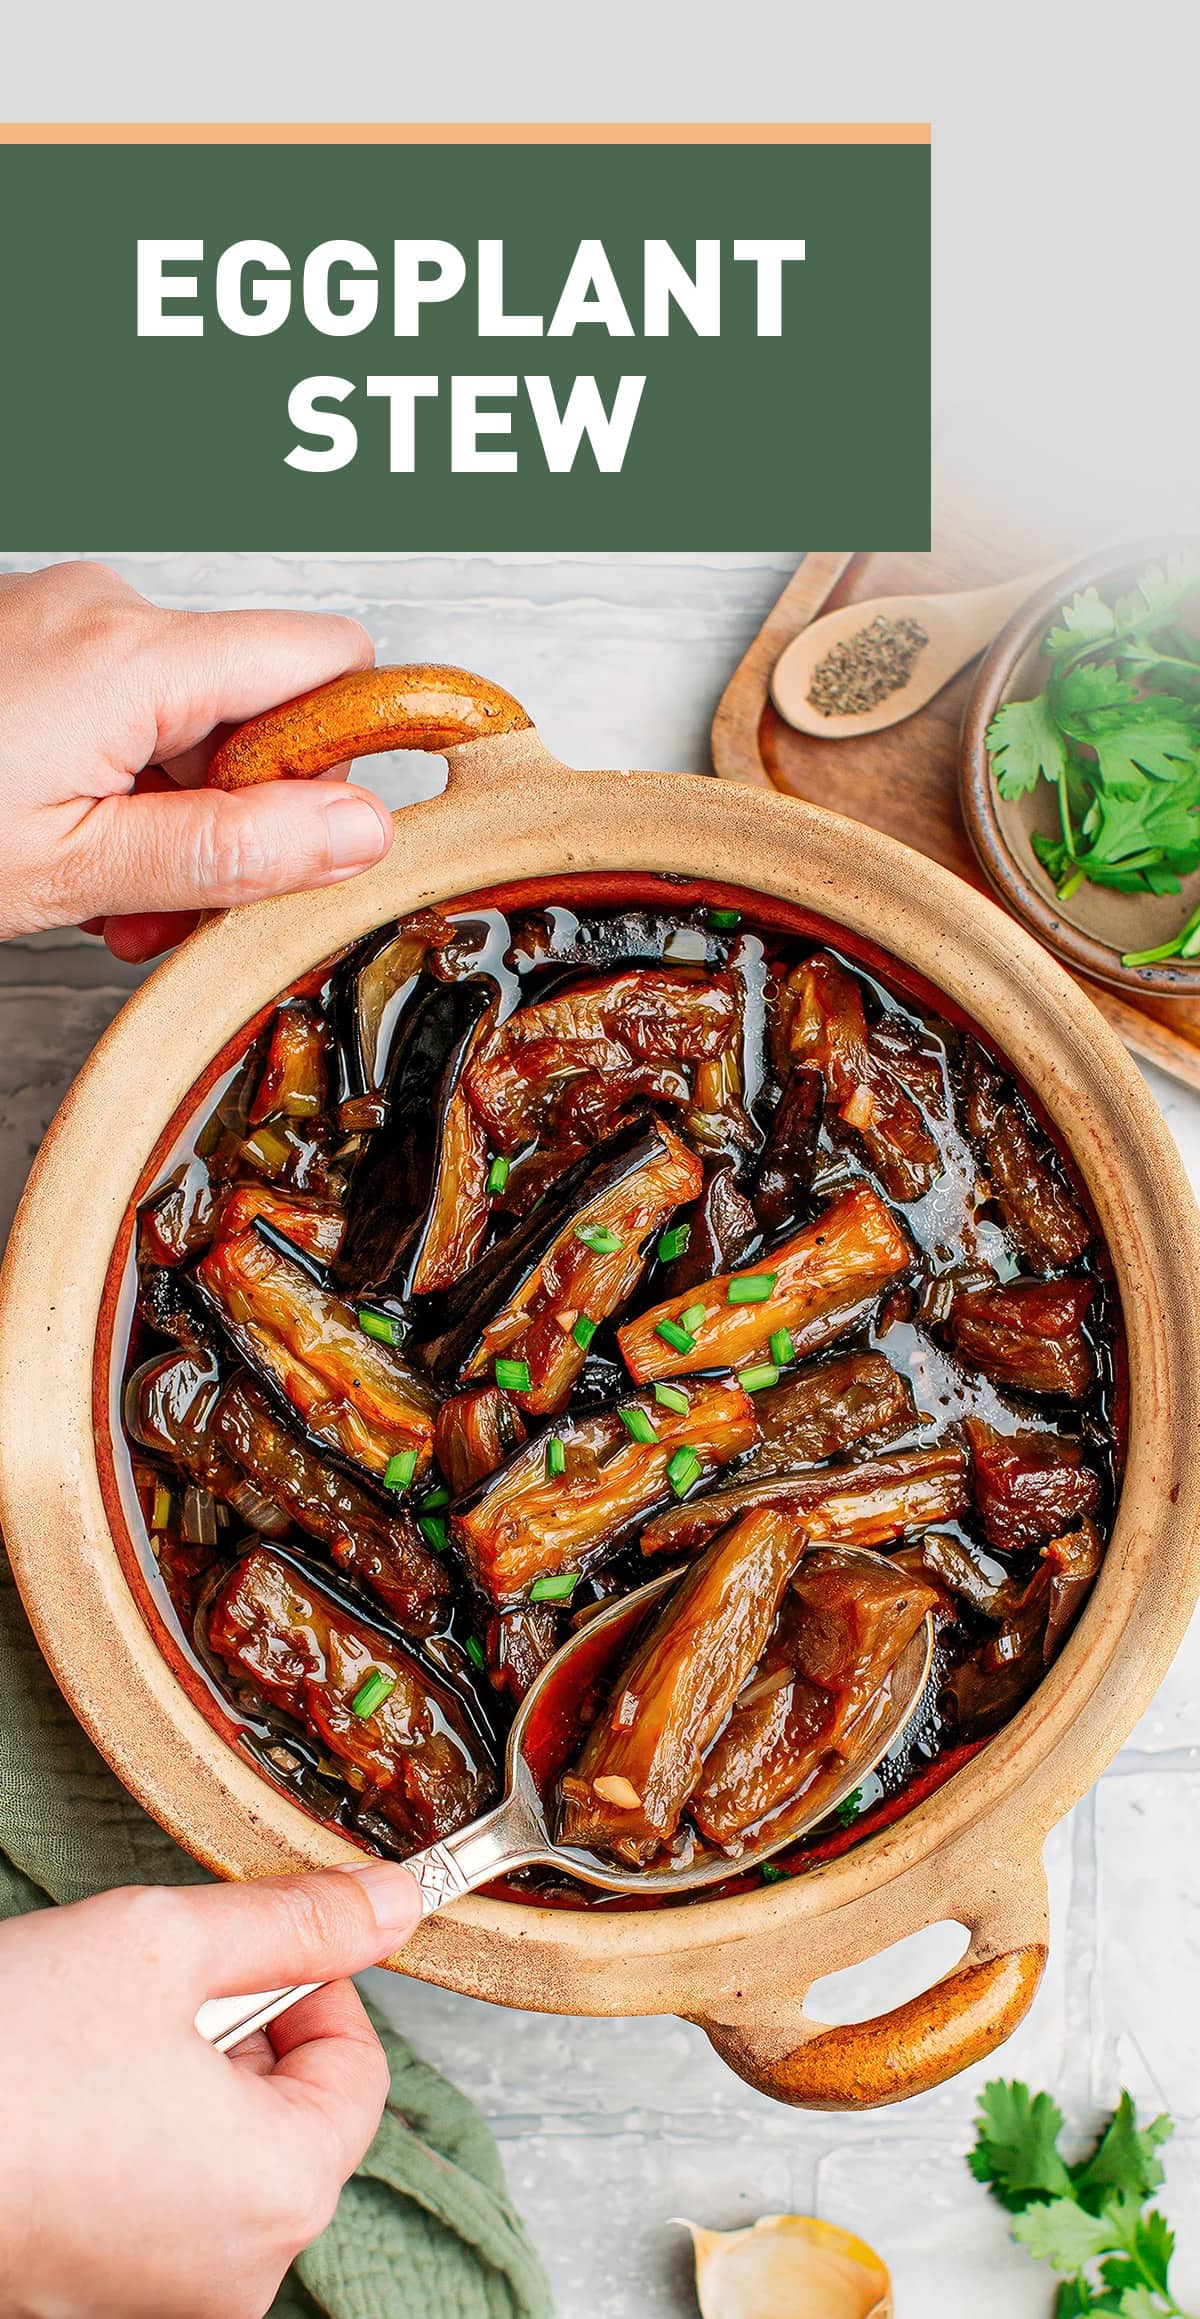 This eggplant stew features melty and juicy chunks of eggplant cooked in a sweet and salty sauce. It is infused with garlic, shallots, green onions, and soy sauce for plenty of umami goodness! This hearty meal is ideal for cold evenings and pairs perfectly with a serving of fluffy white rice. #vegan #plantbased #eggplant